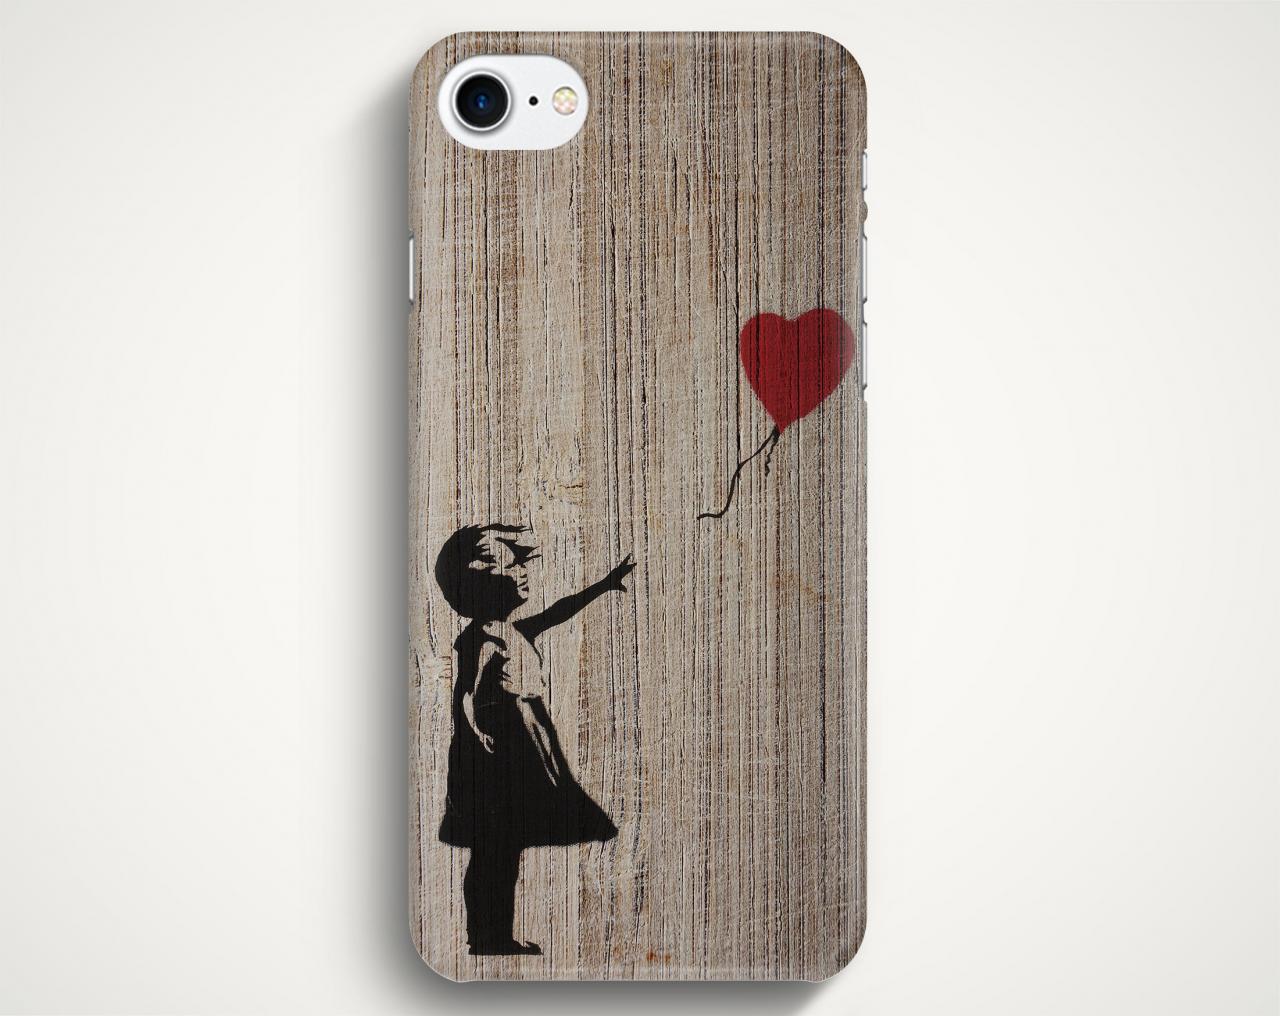 Girl With Balloon On Wood Texture Case For Iphone 7 Iphone 7 Plus Samsung Galaxy S8 Galaxy S7 Galaxy A3 Galaxy A5 Galaxy A7 Lg G6 Lg G5 Htc 10